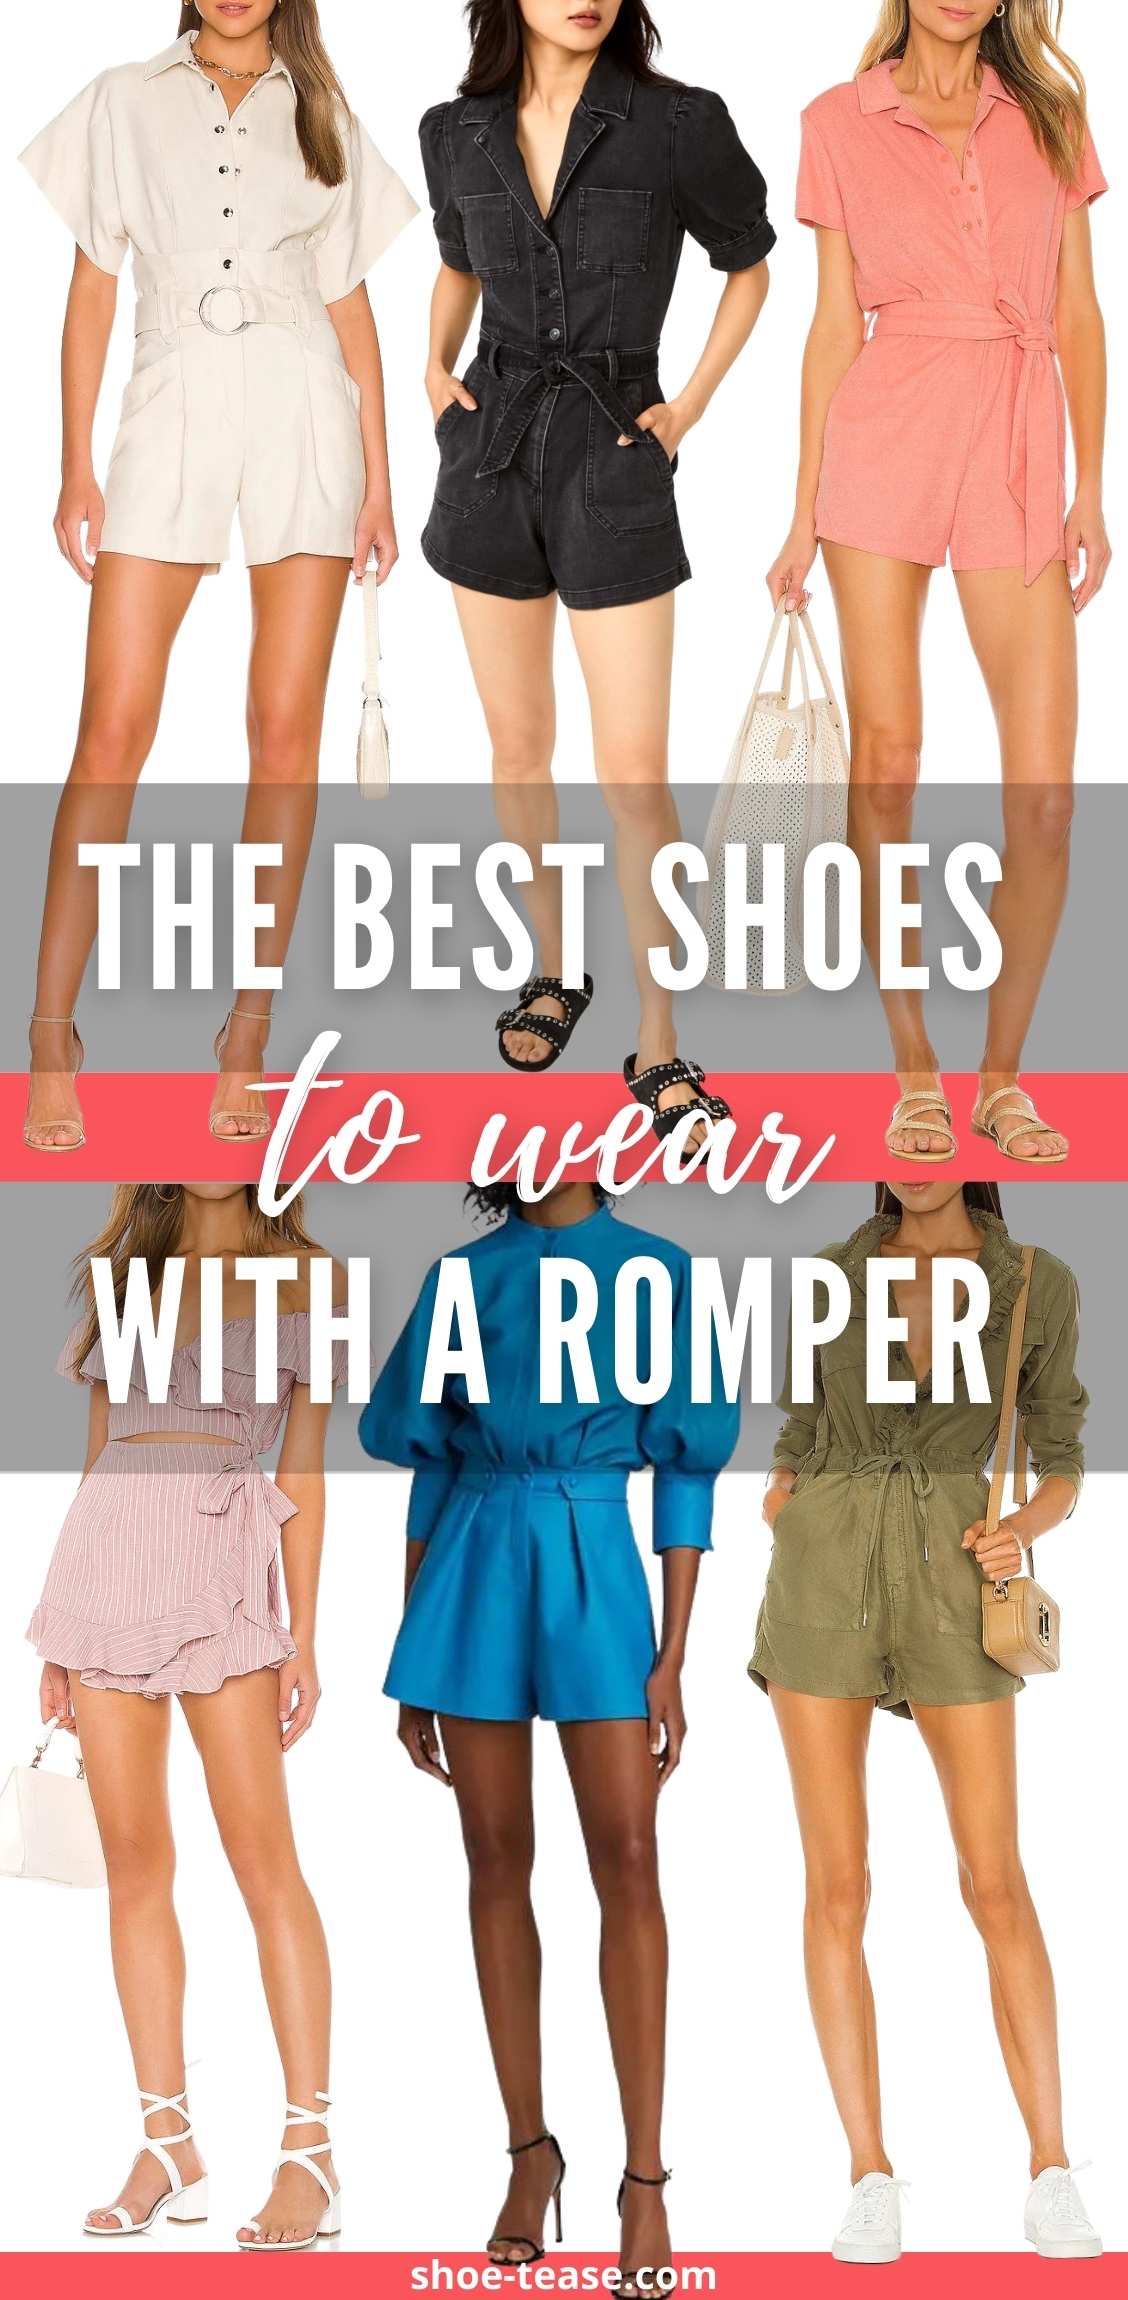 11 Best Shoes to Wear with Rompers to Style Chic Romper Outfits